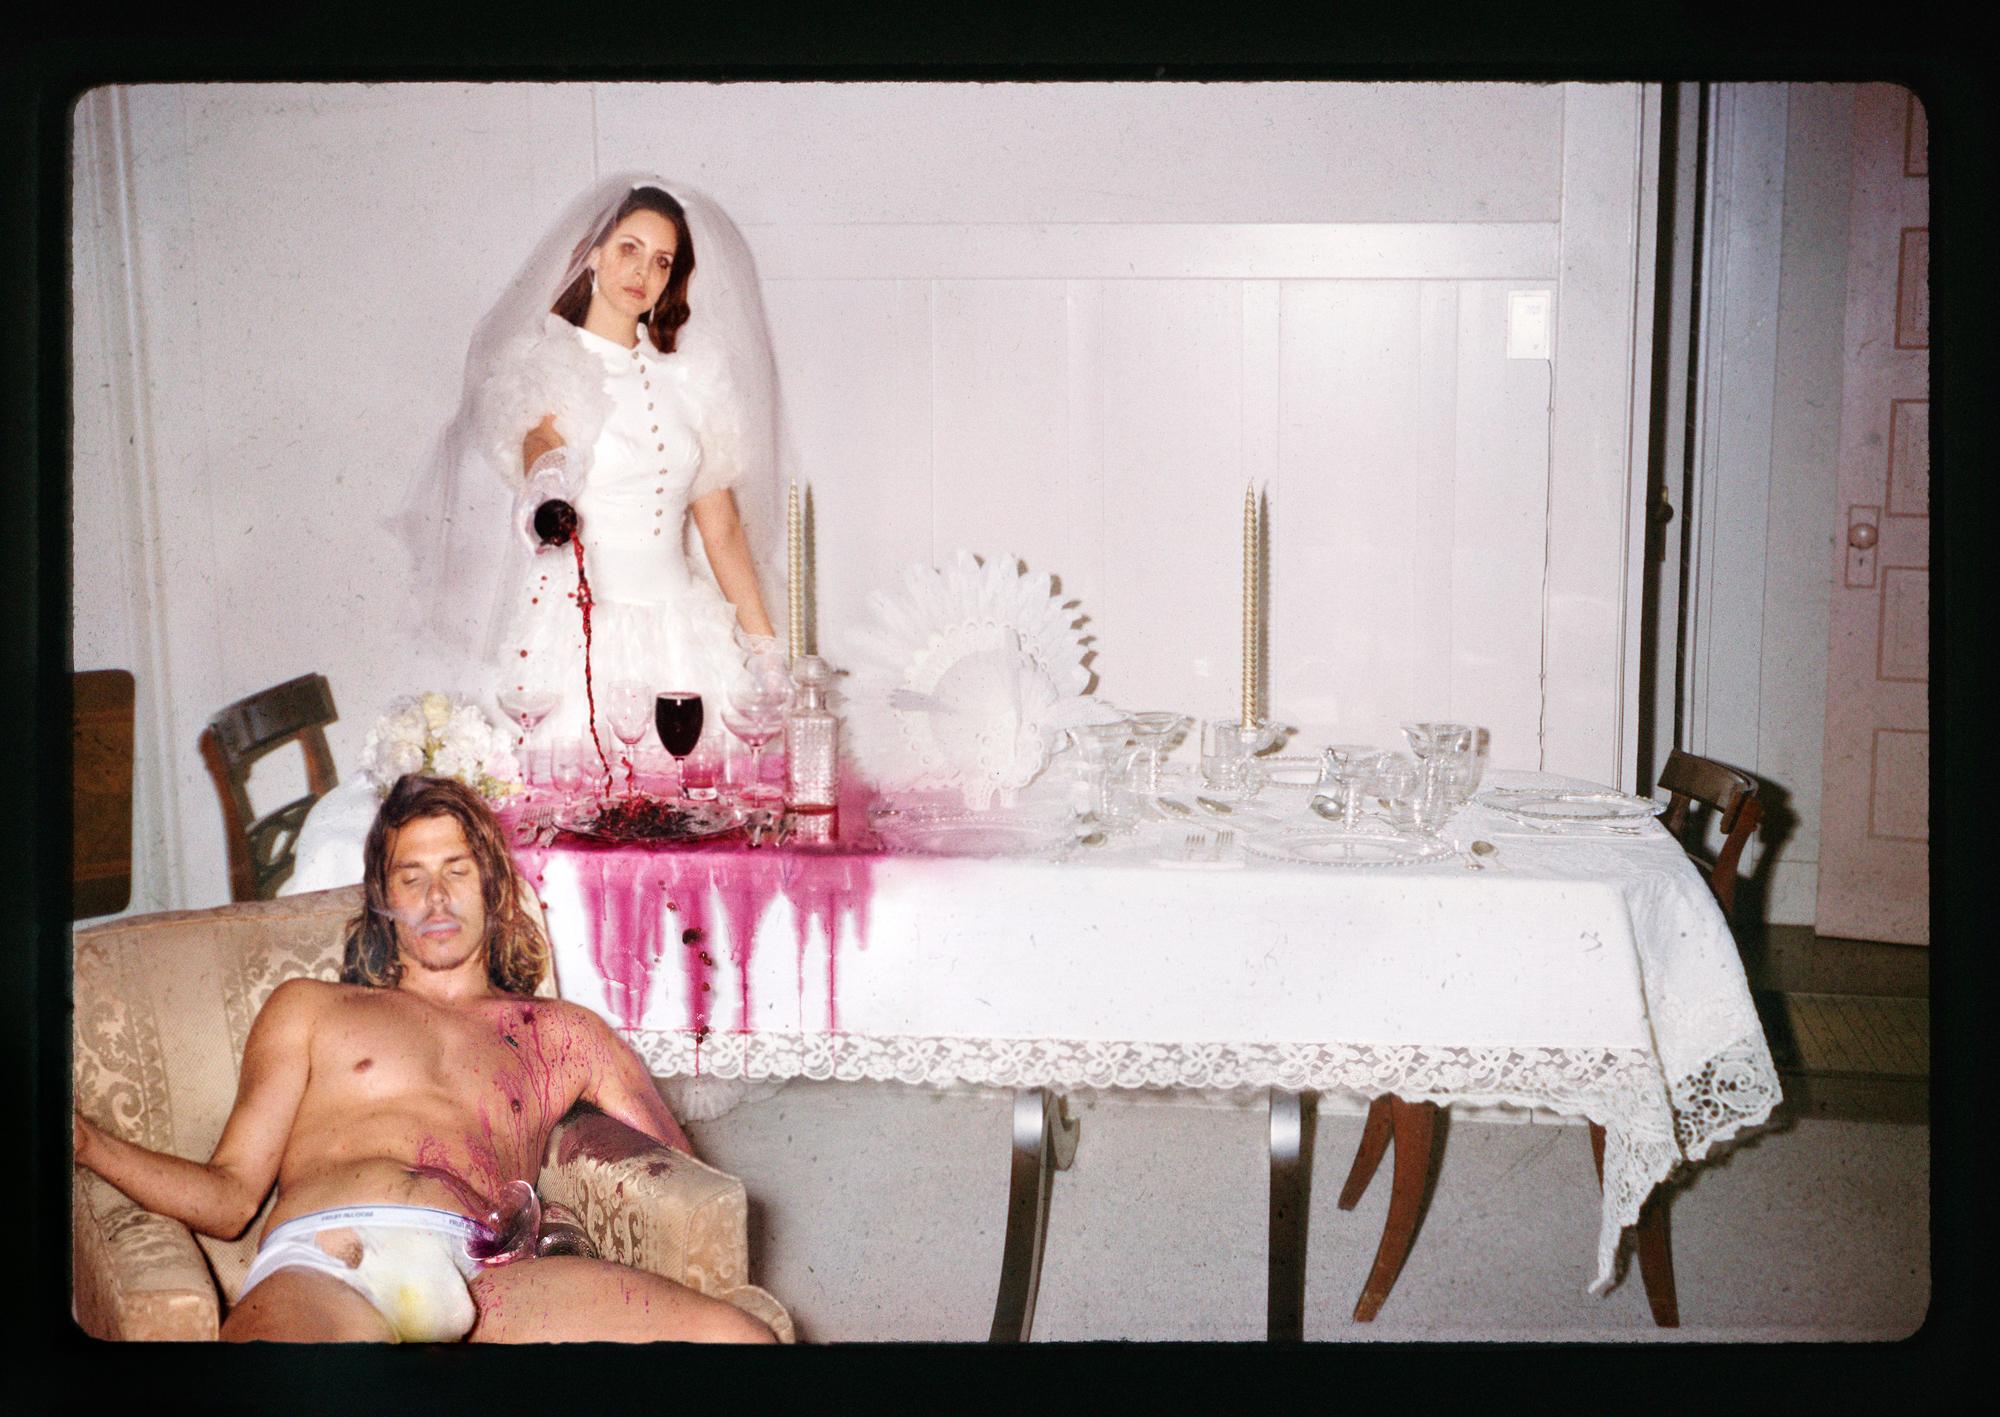 Color Photograph David LaChapelle - Lana Del Ray : Newly Weds, Los Angeles